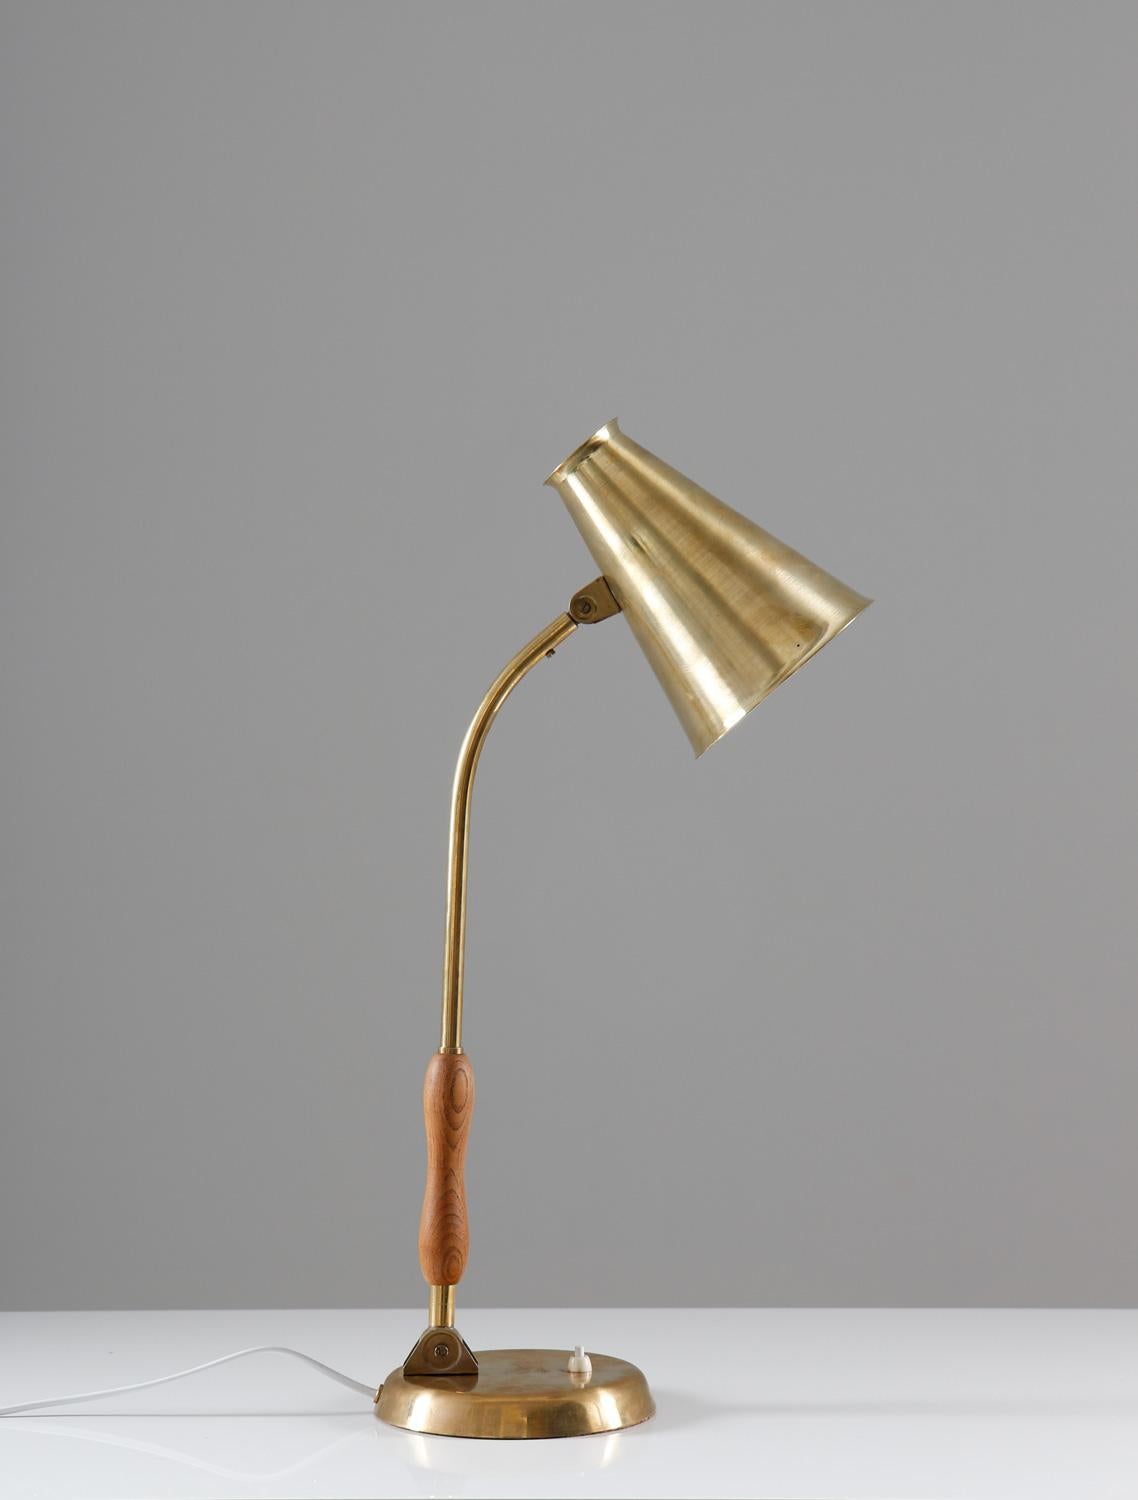 Rare desk lamp attributed to ASEA, Sweden, model 41065-1.
This large lamp is made from solid brass with black wooden details. Both the shade and the rod are adjustable, making it perfect as a desk lamp or reading lamp.

Condition: Very good